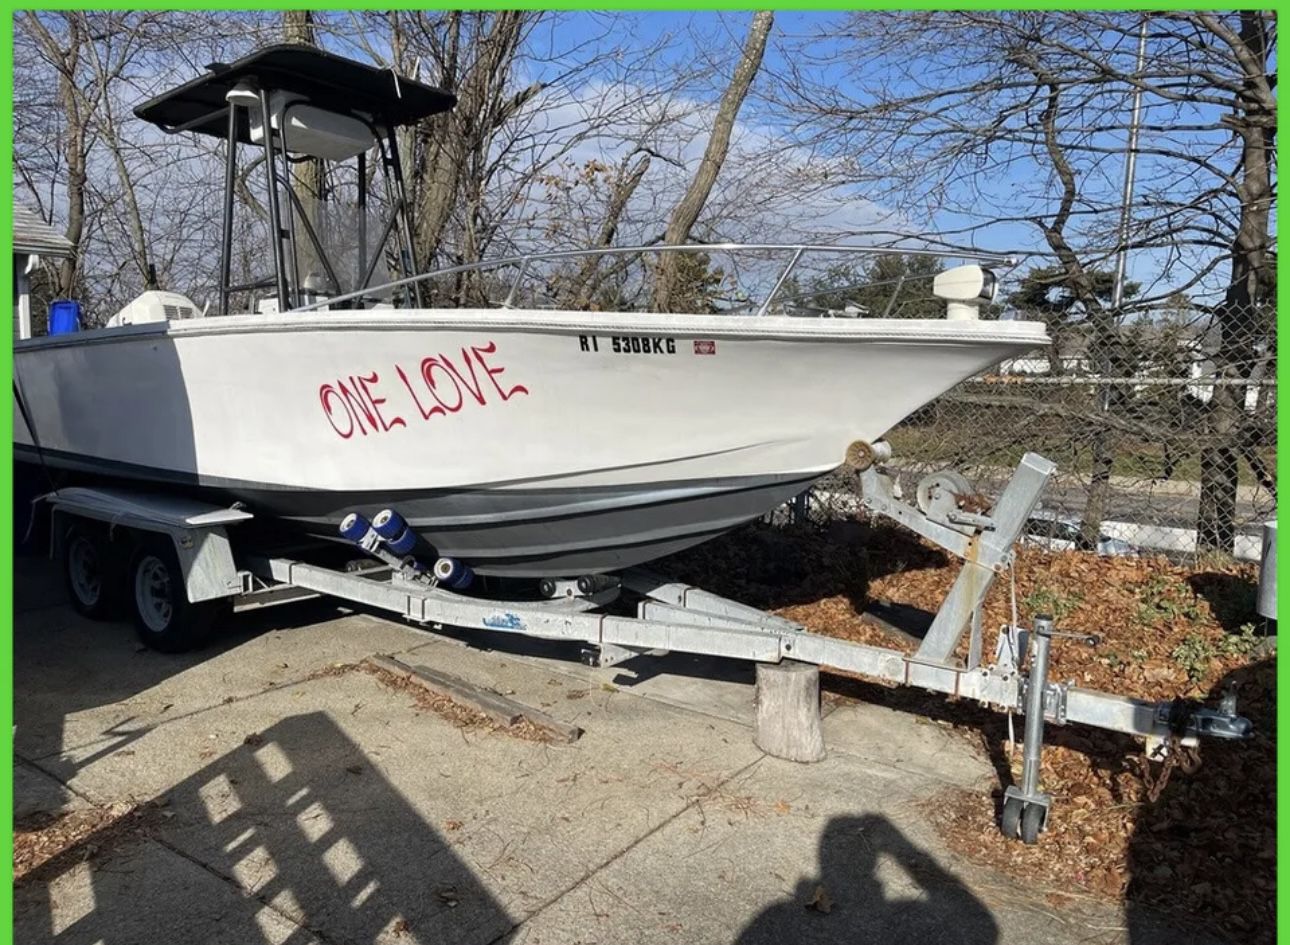 Two boats with outboards and trailers 1994 and 1990 1994 A & L Fiberglass Duke 21’ Saltwater Fishing Boat  and trailerJohnson 200HP Ocean Runner and 1990 Hydra-Sports 18' with trailer and two engines Both Center Console 1994 A & L Fiberglass Duke 21’ Saltwater Fishing Boat  and trailerJohnson 200HP Ocean Runner and 1990 Hydra-Sports 18' with trailer and two engines Center Console